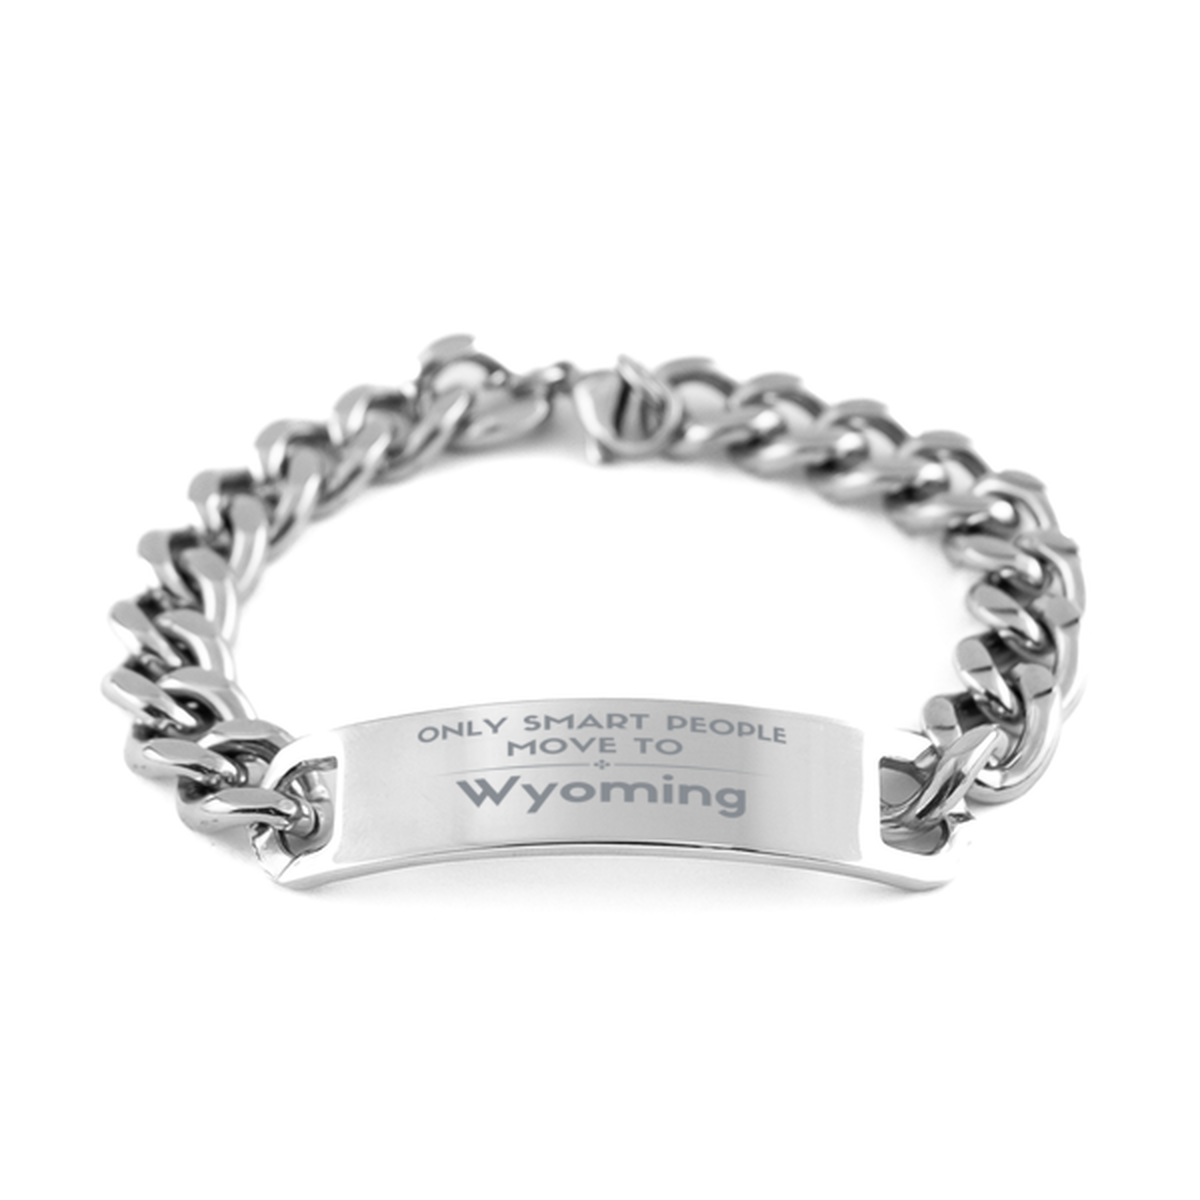 Only smart people move to Wyoming Cuban Chain Stainless Steel Bracelet, Gag Gifts For Wyoming, Move to Wyoming Gifts for Friends Coworker Funny Saying Quote